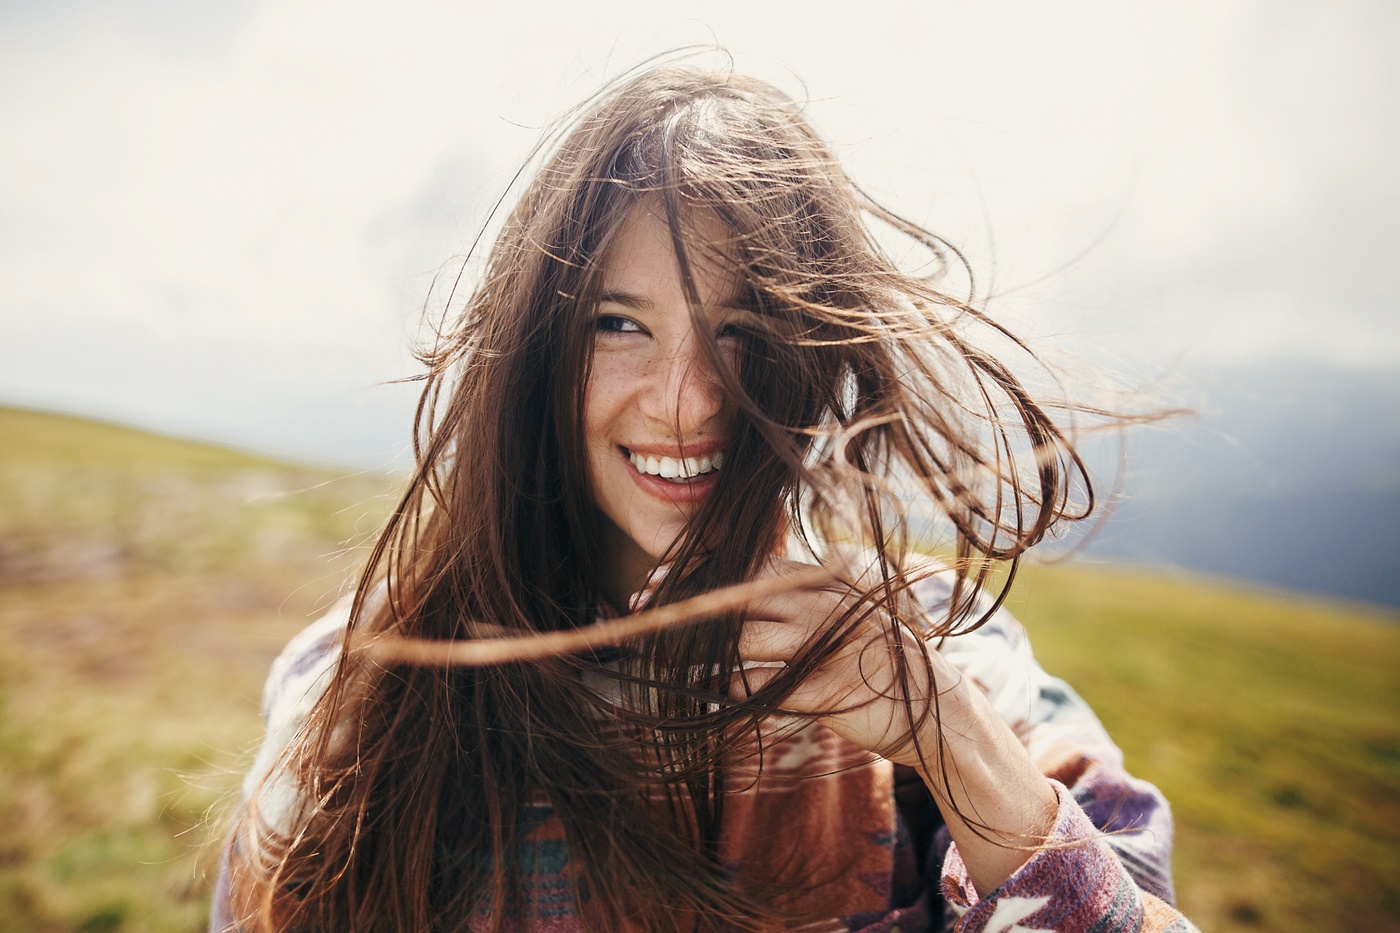 Smiling Woman with Windblown Hair